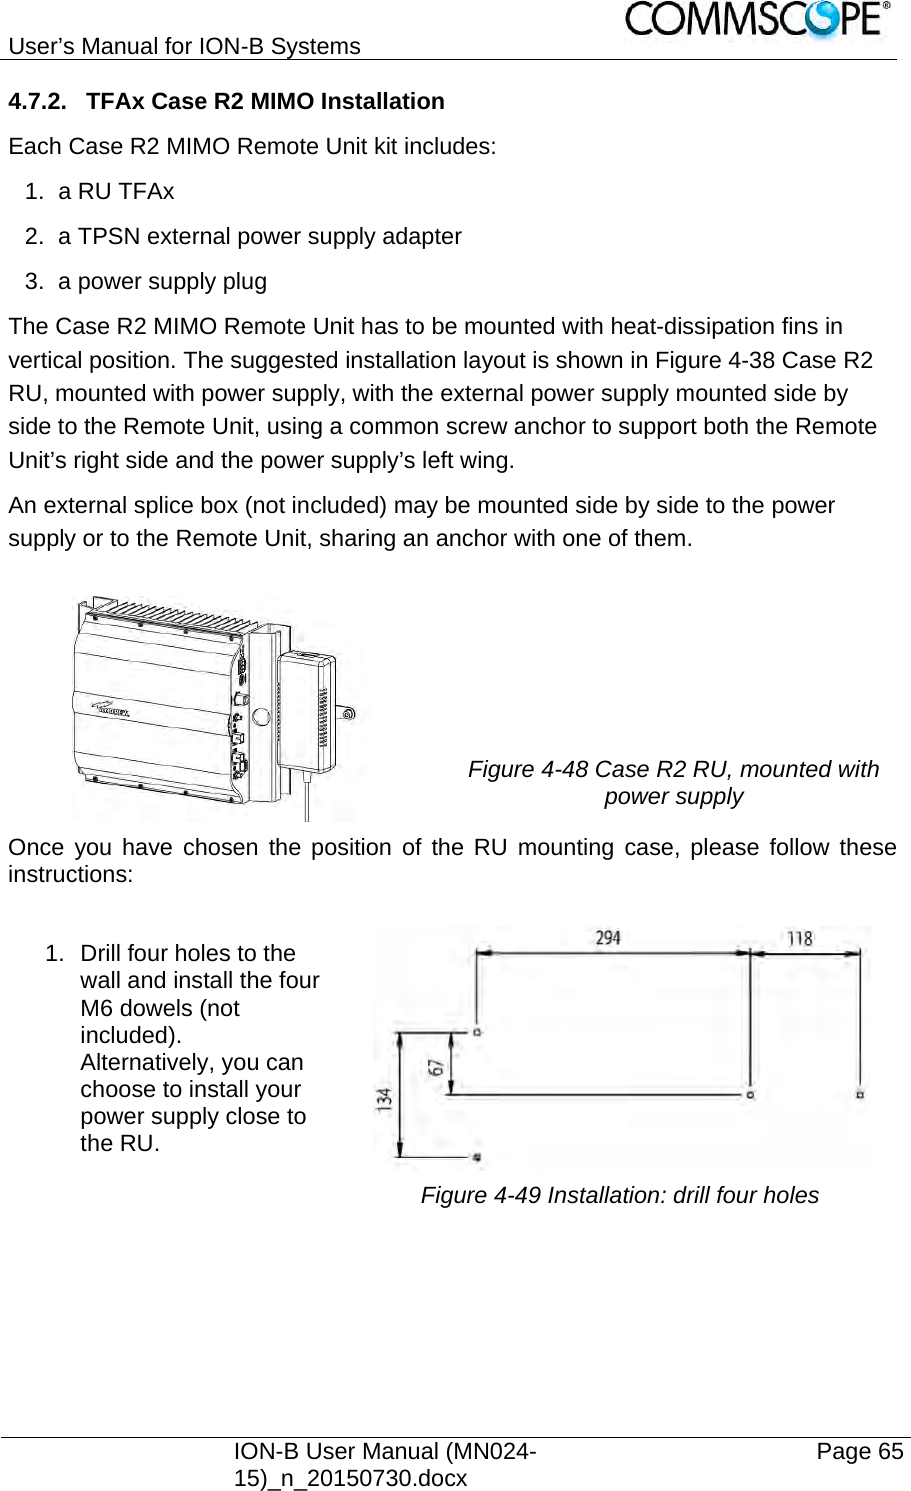 User’s Manual for ION-B Systems    ION-B User Manual (MN024-15)_n_20150730.docx  Page 65 4.7.2.  TFAx Case R2 MIMO Installation Each Case R2 MIMO Remote Unit kit includes: 1. a RU TFAx  2.  a TPSN external power supply adapter 3.  a power supply plug The Case R2 MIMO Remote Unit has to be mounted with heat-dissipation fins in vertical position. The suggested installation layout is shown in Figure 4-38 Case R2 RU, mounted with power supply, with the external power supply mounted side by side to the Remote Unit, using a common screw anchor to support both the Remote Unit’s right side and the power supply’s left wing. An external splice box (not included) may be mounted side by side to the power supply or to the Remote Unit, sharing an anchor with one of them.  Figure 4-48 Case R2 RU, mounted with power supply Once you have chosen the position of the RU mounting case, please follow these instructions:  1.  Drill four holes to the wall and install the four M6 dowels (not included).  Alternatively, you can choose to install your power supply close to the RU.  Figure 4-49 Installation: drill four holes  